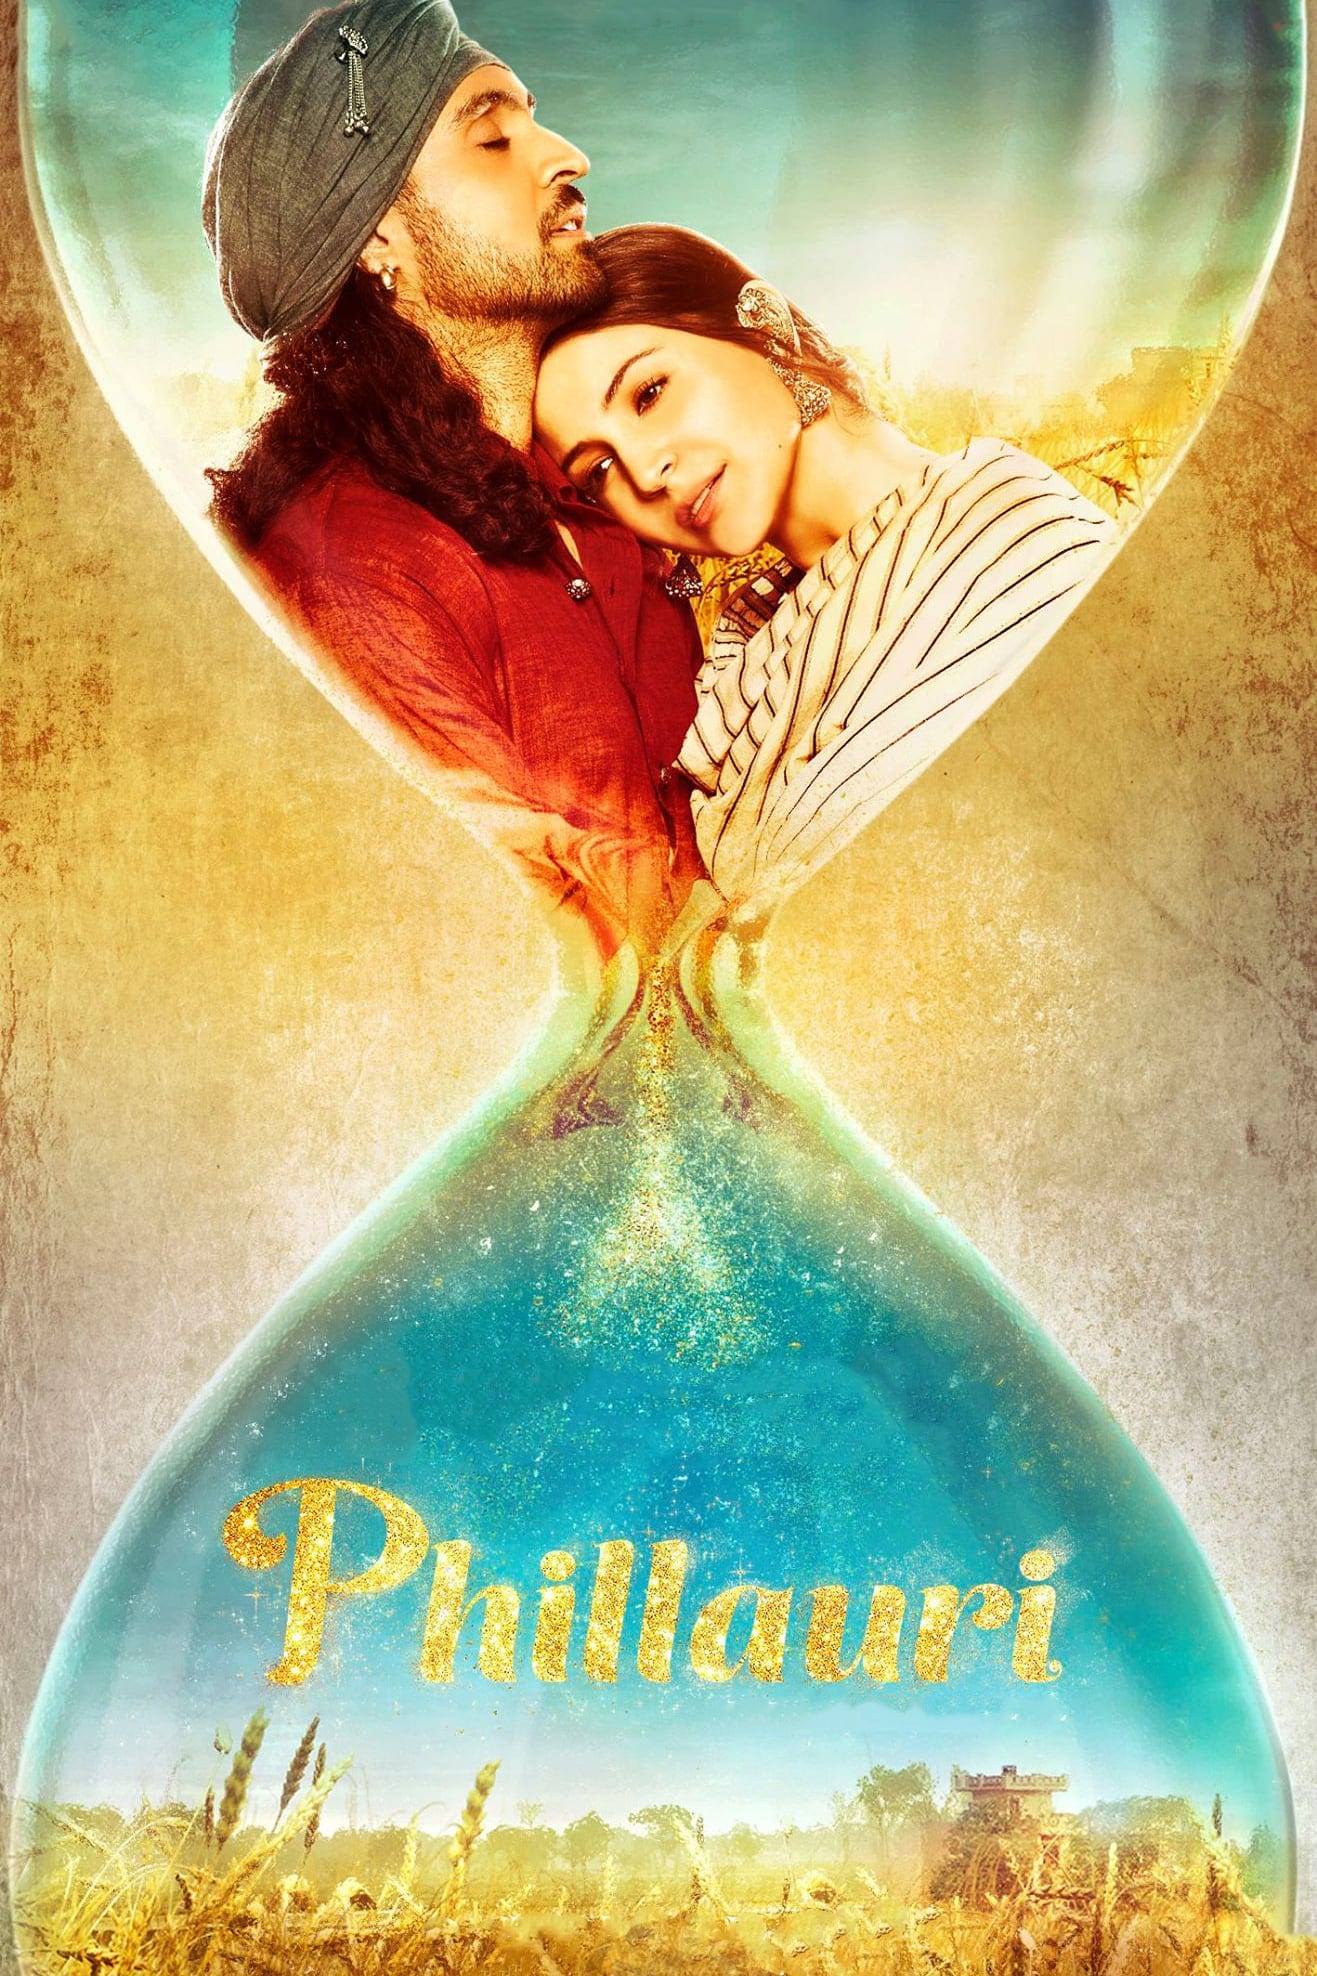 Poster for the movie "Phillauri"